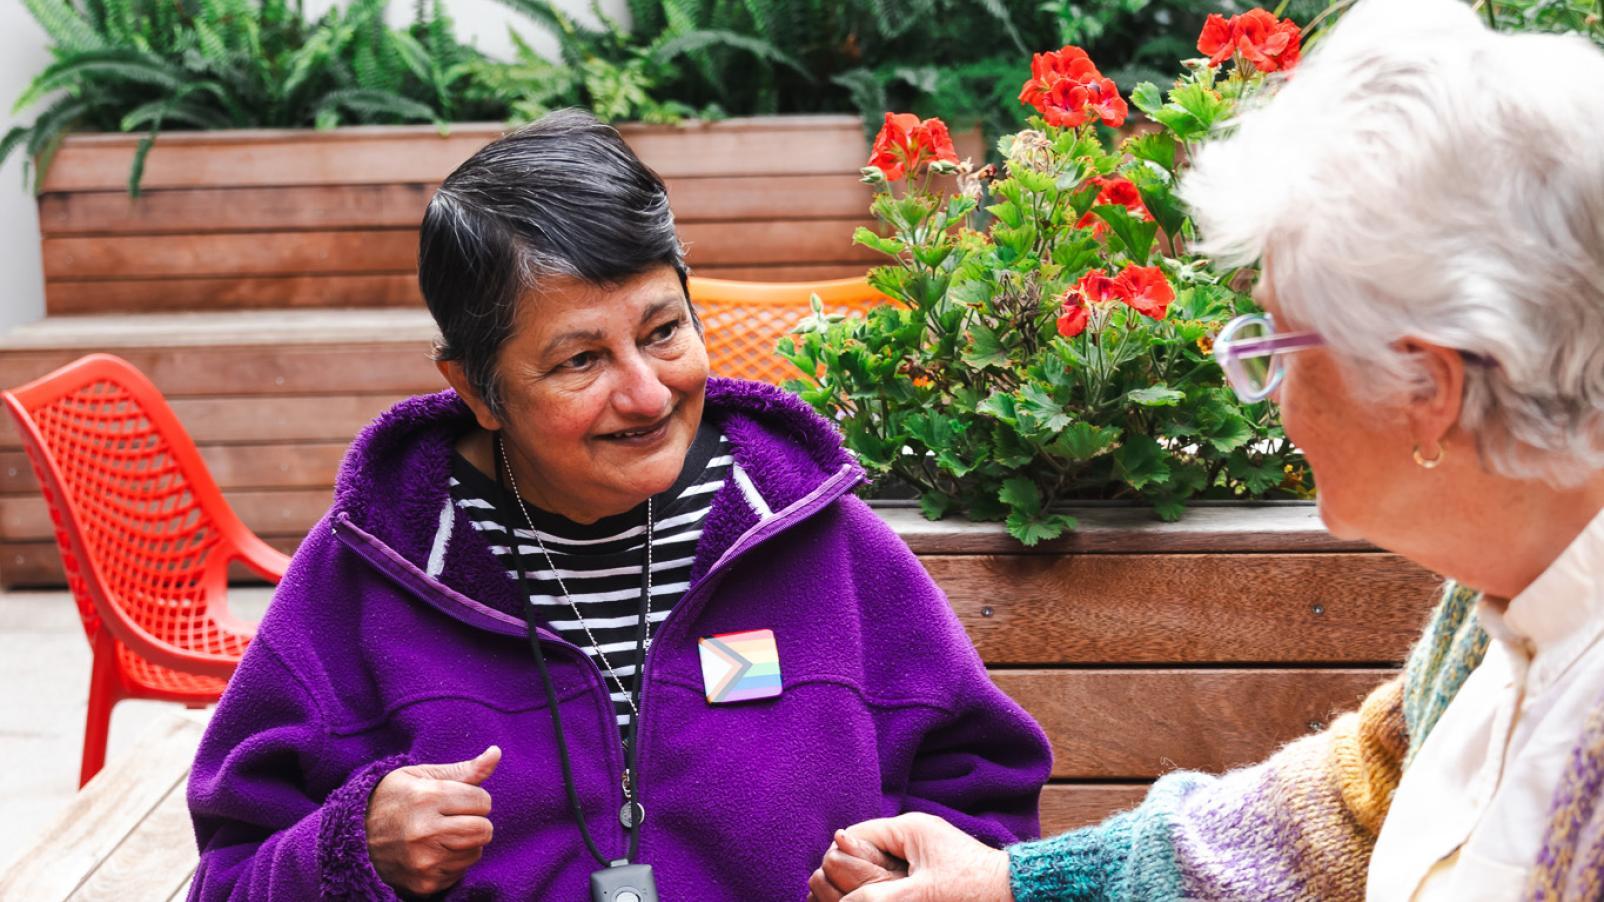 Two women at a café table outside holding hands and smiling.